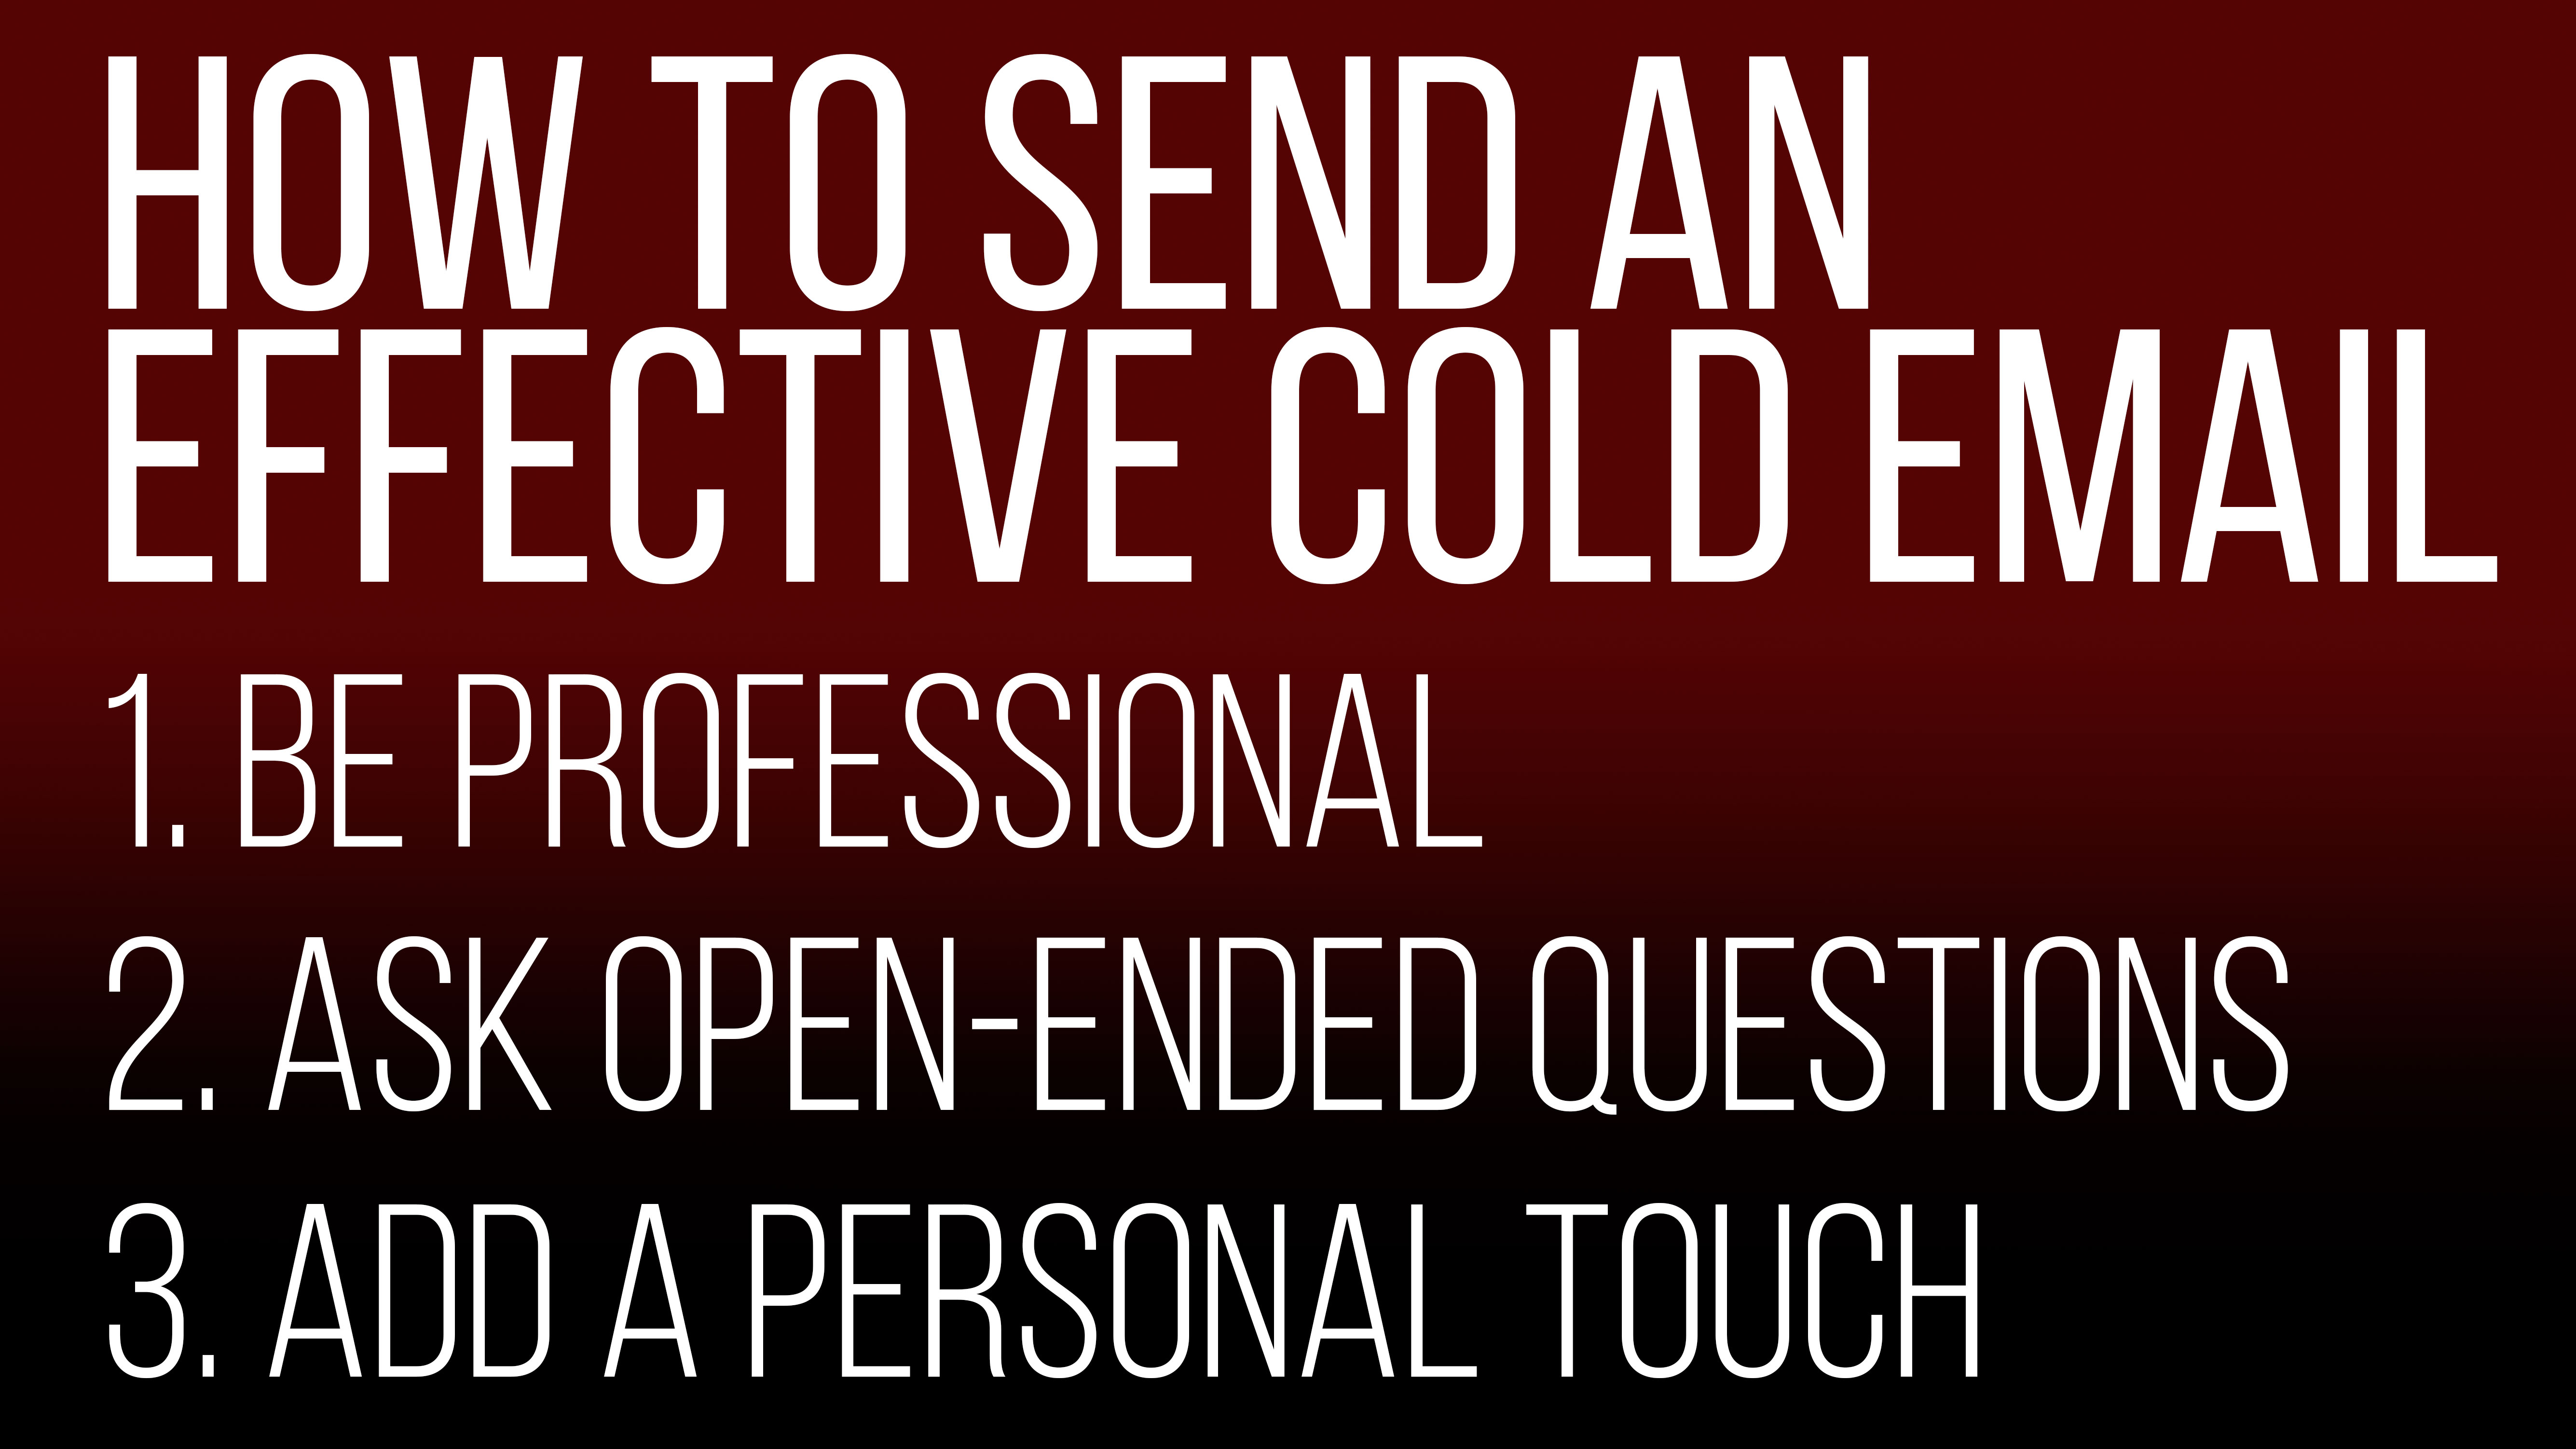 How to Send an Effective Cold Email - Sales Tips